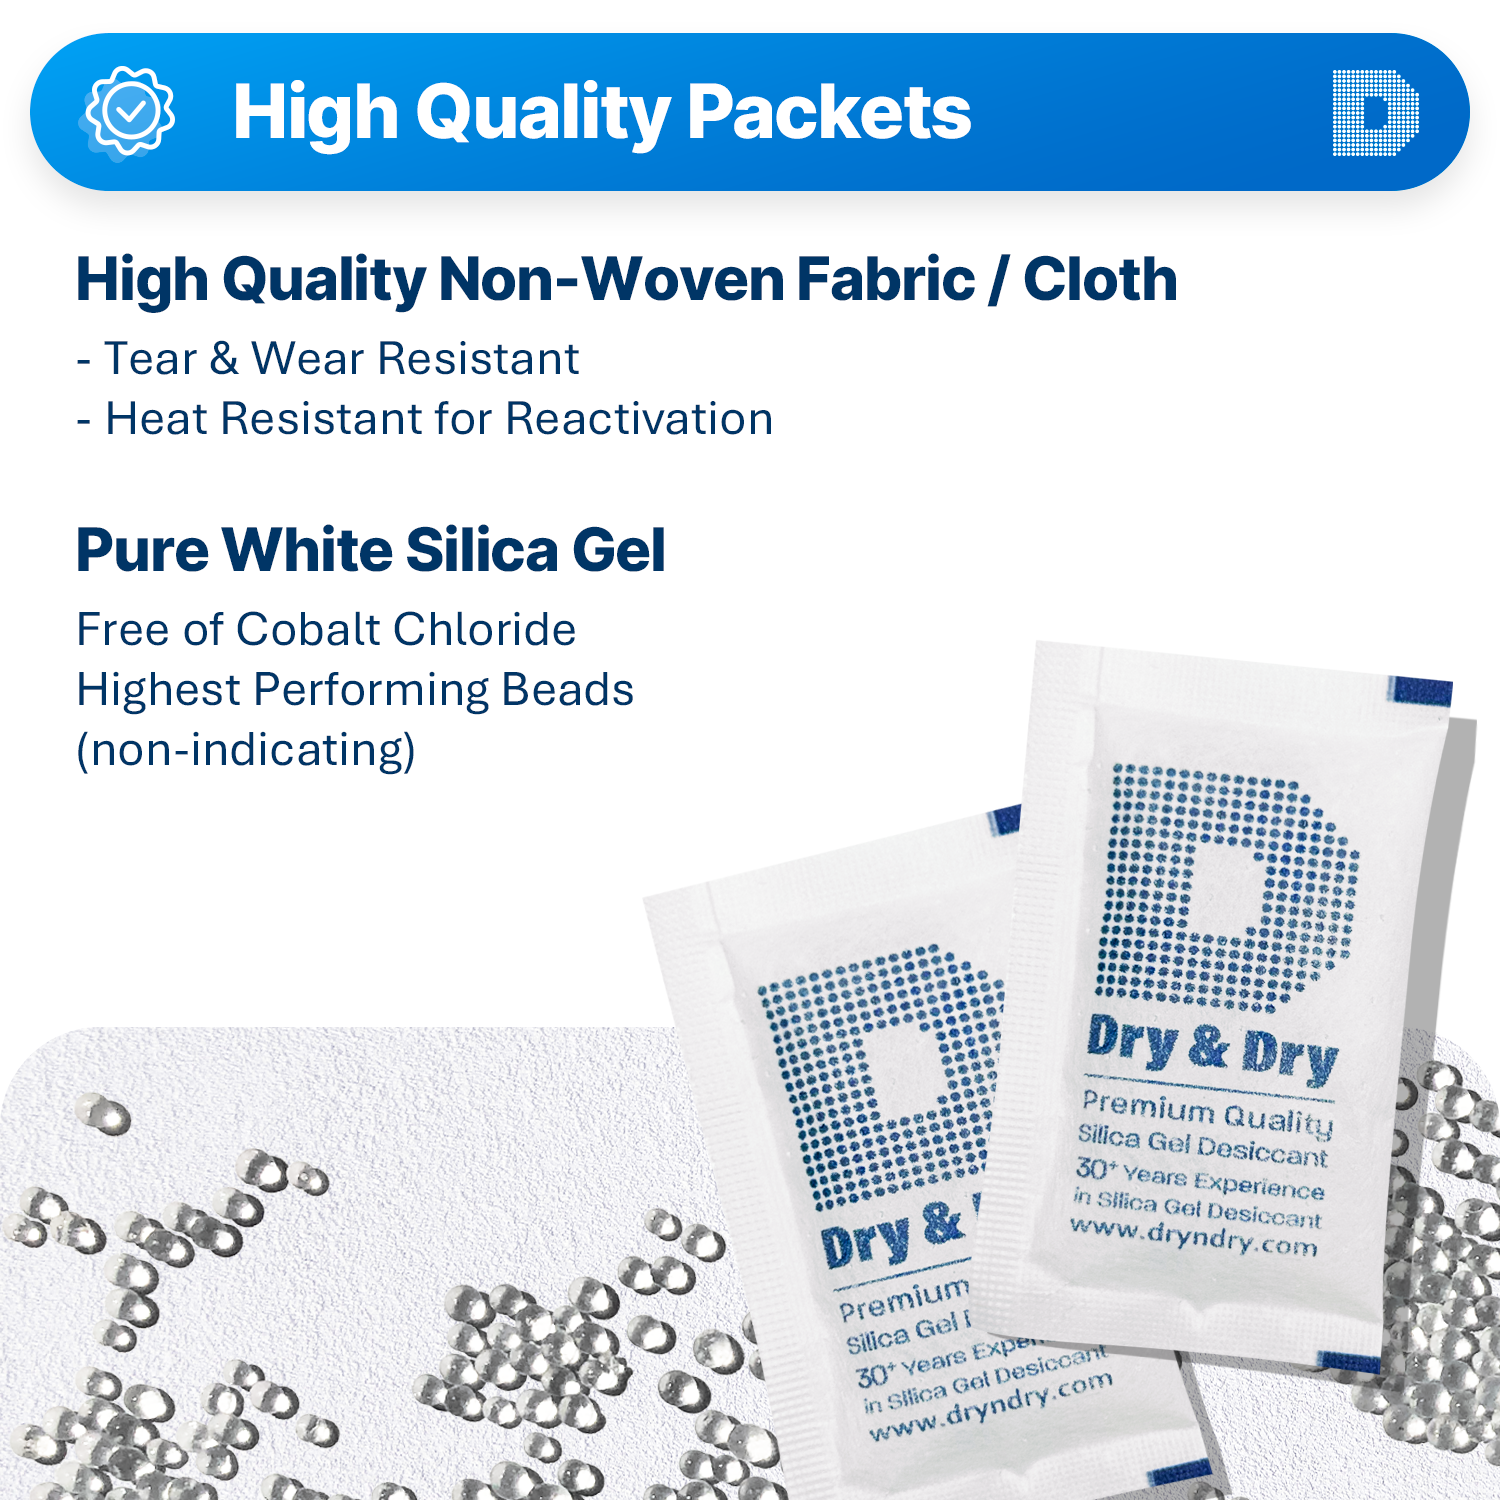 10 Gram Non-Woven Fabric(Cloth) Packets